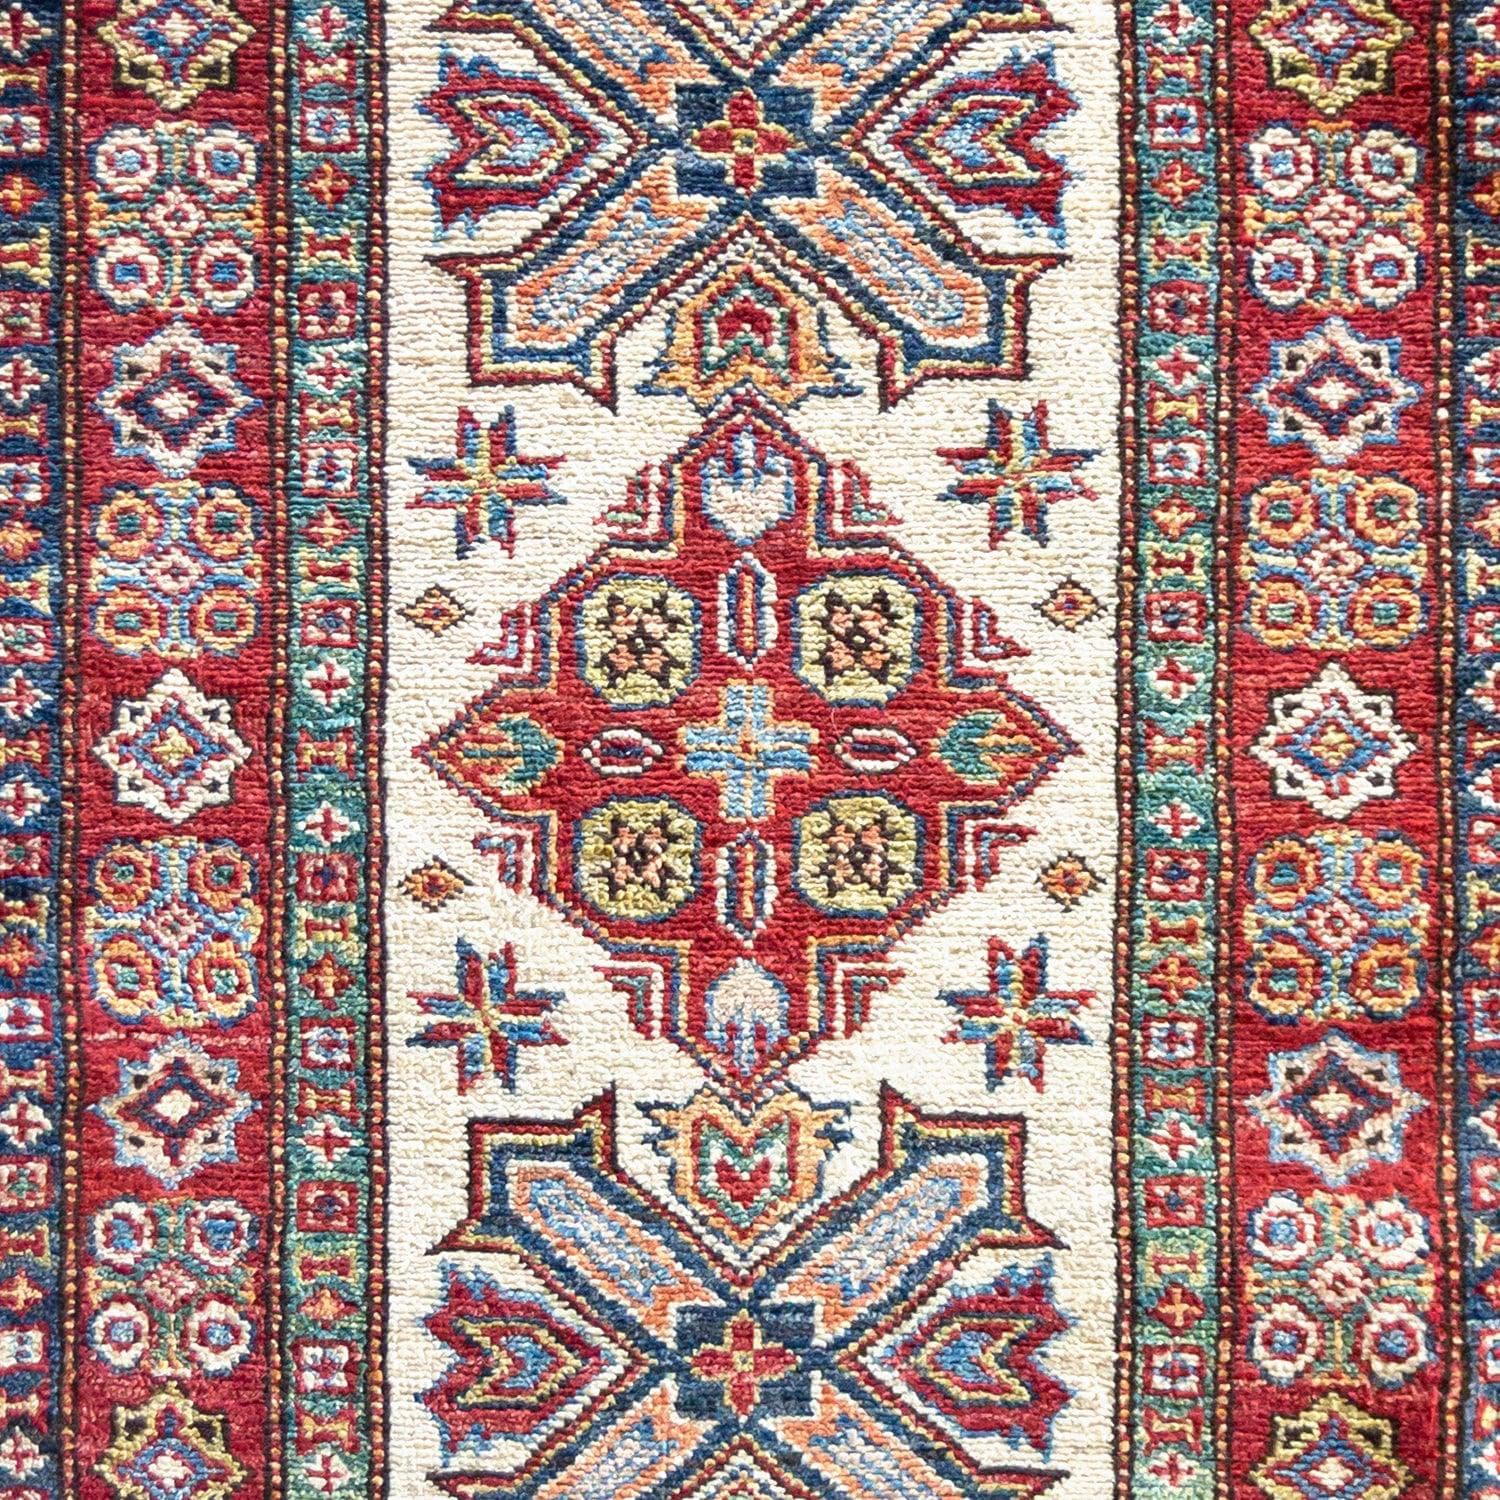 Fine Hand-knotted Wool Traditional Small Rug 65cm x 97cm